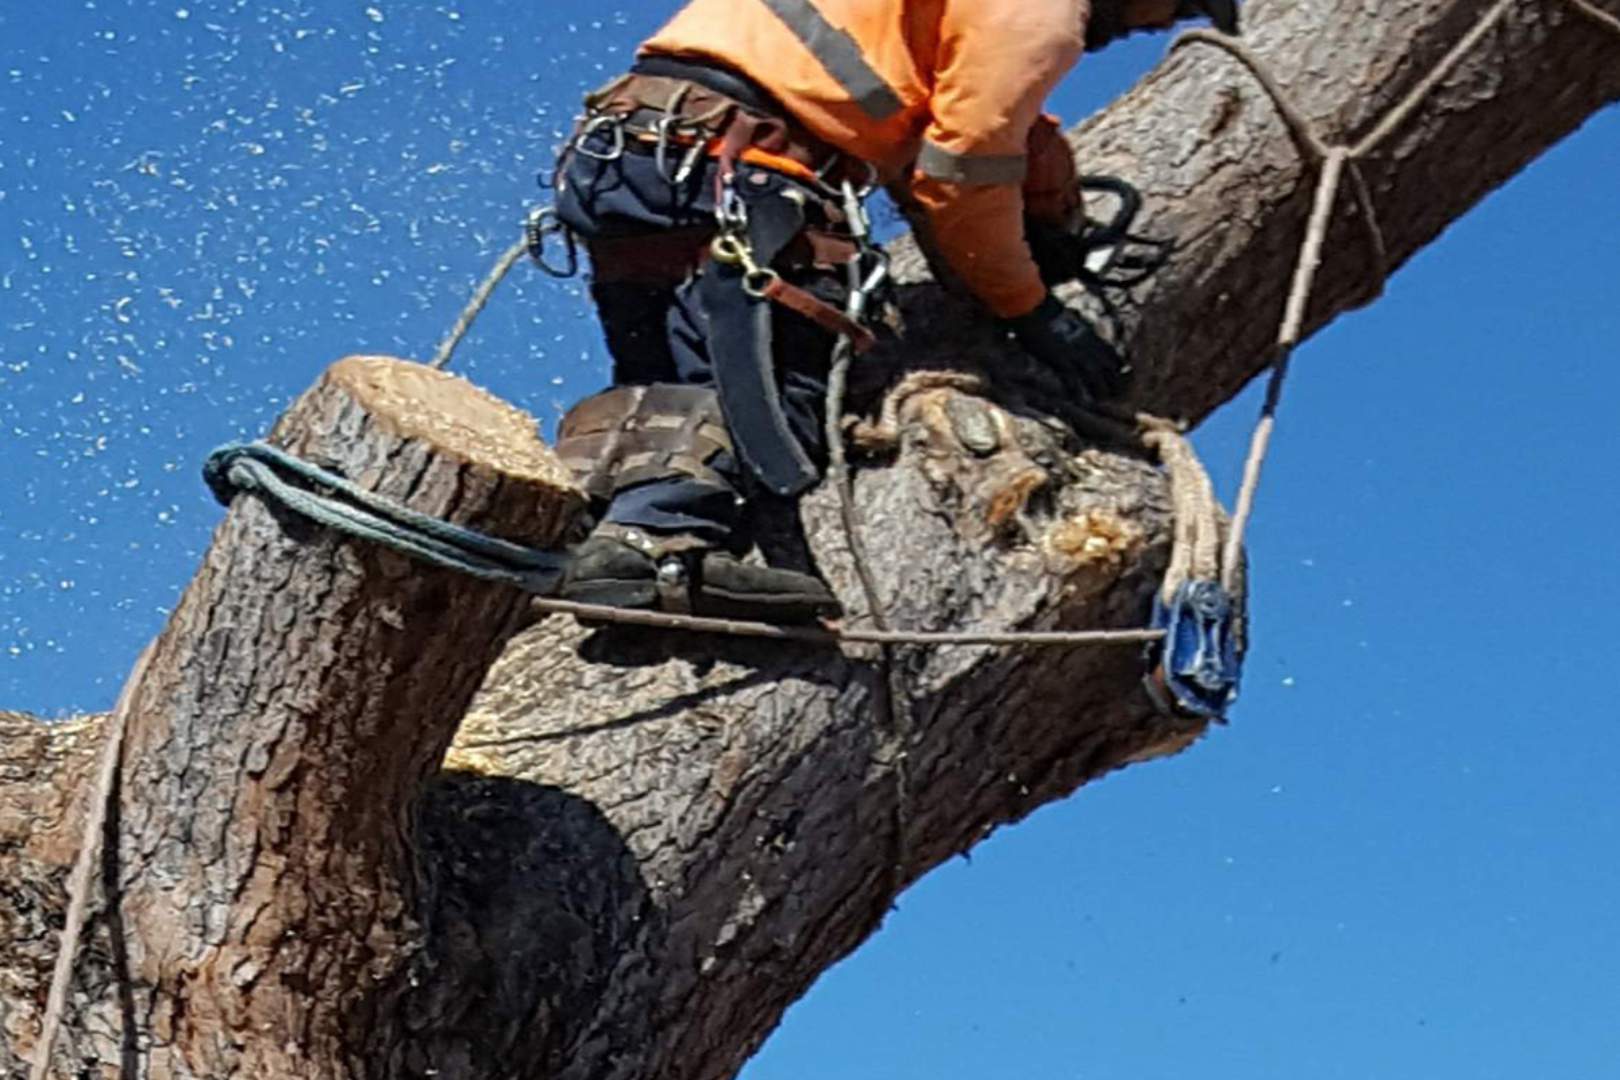 Bay Area Tree Care expert tree trimming